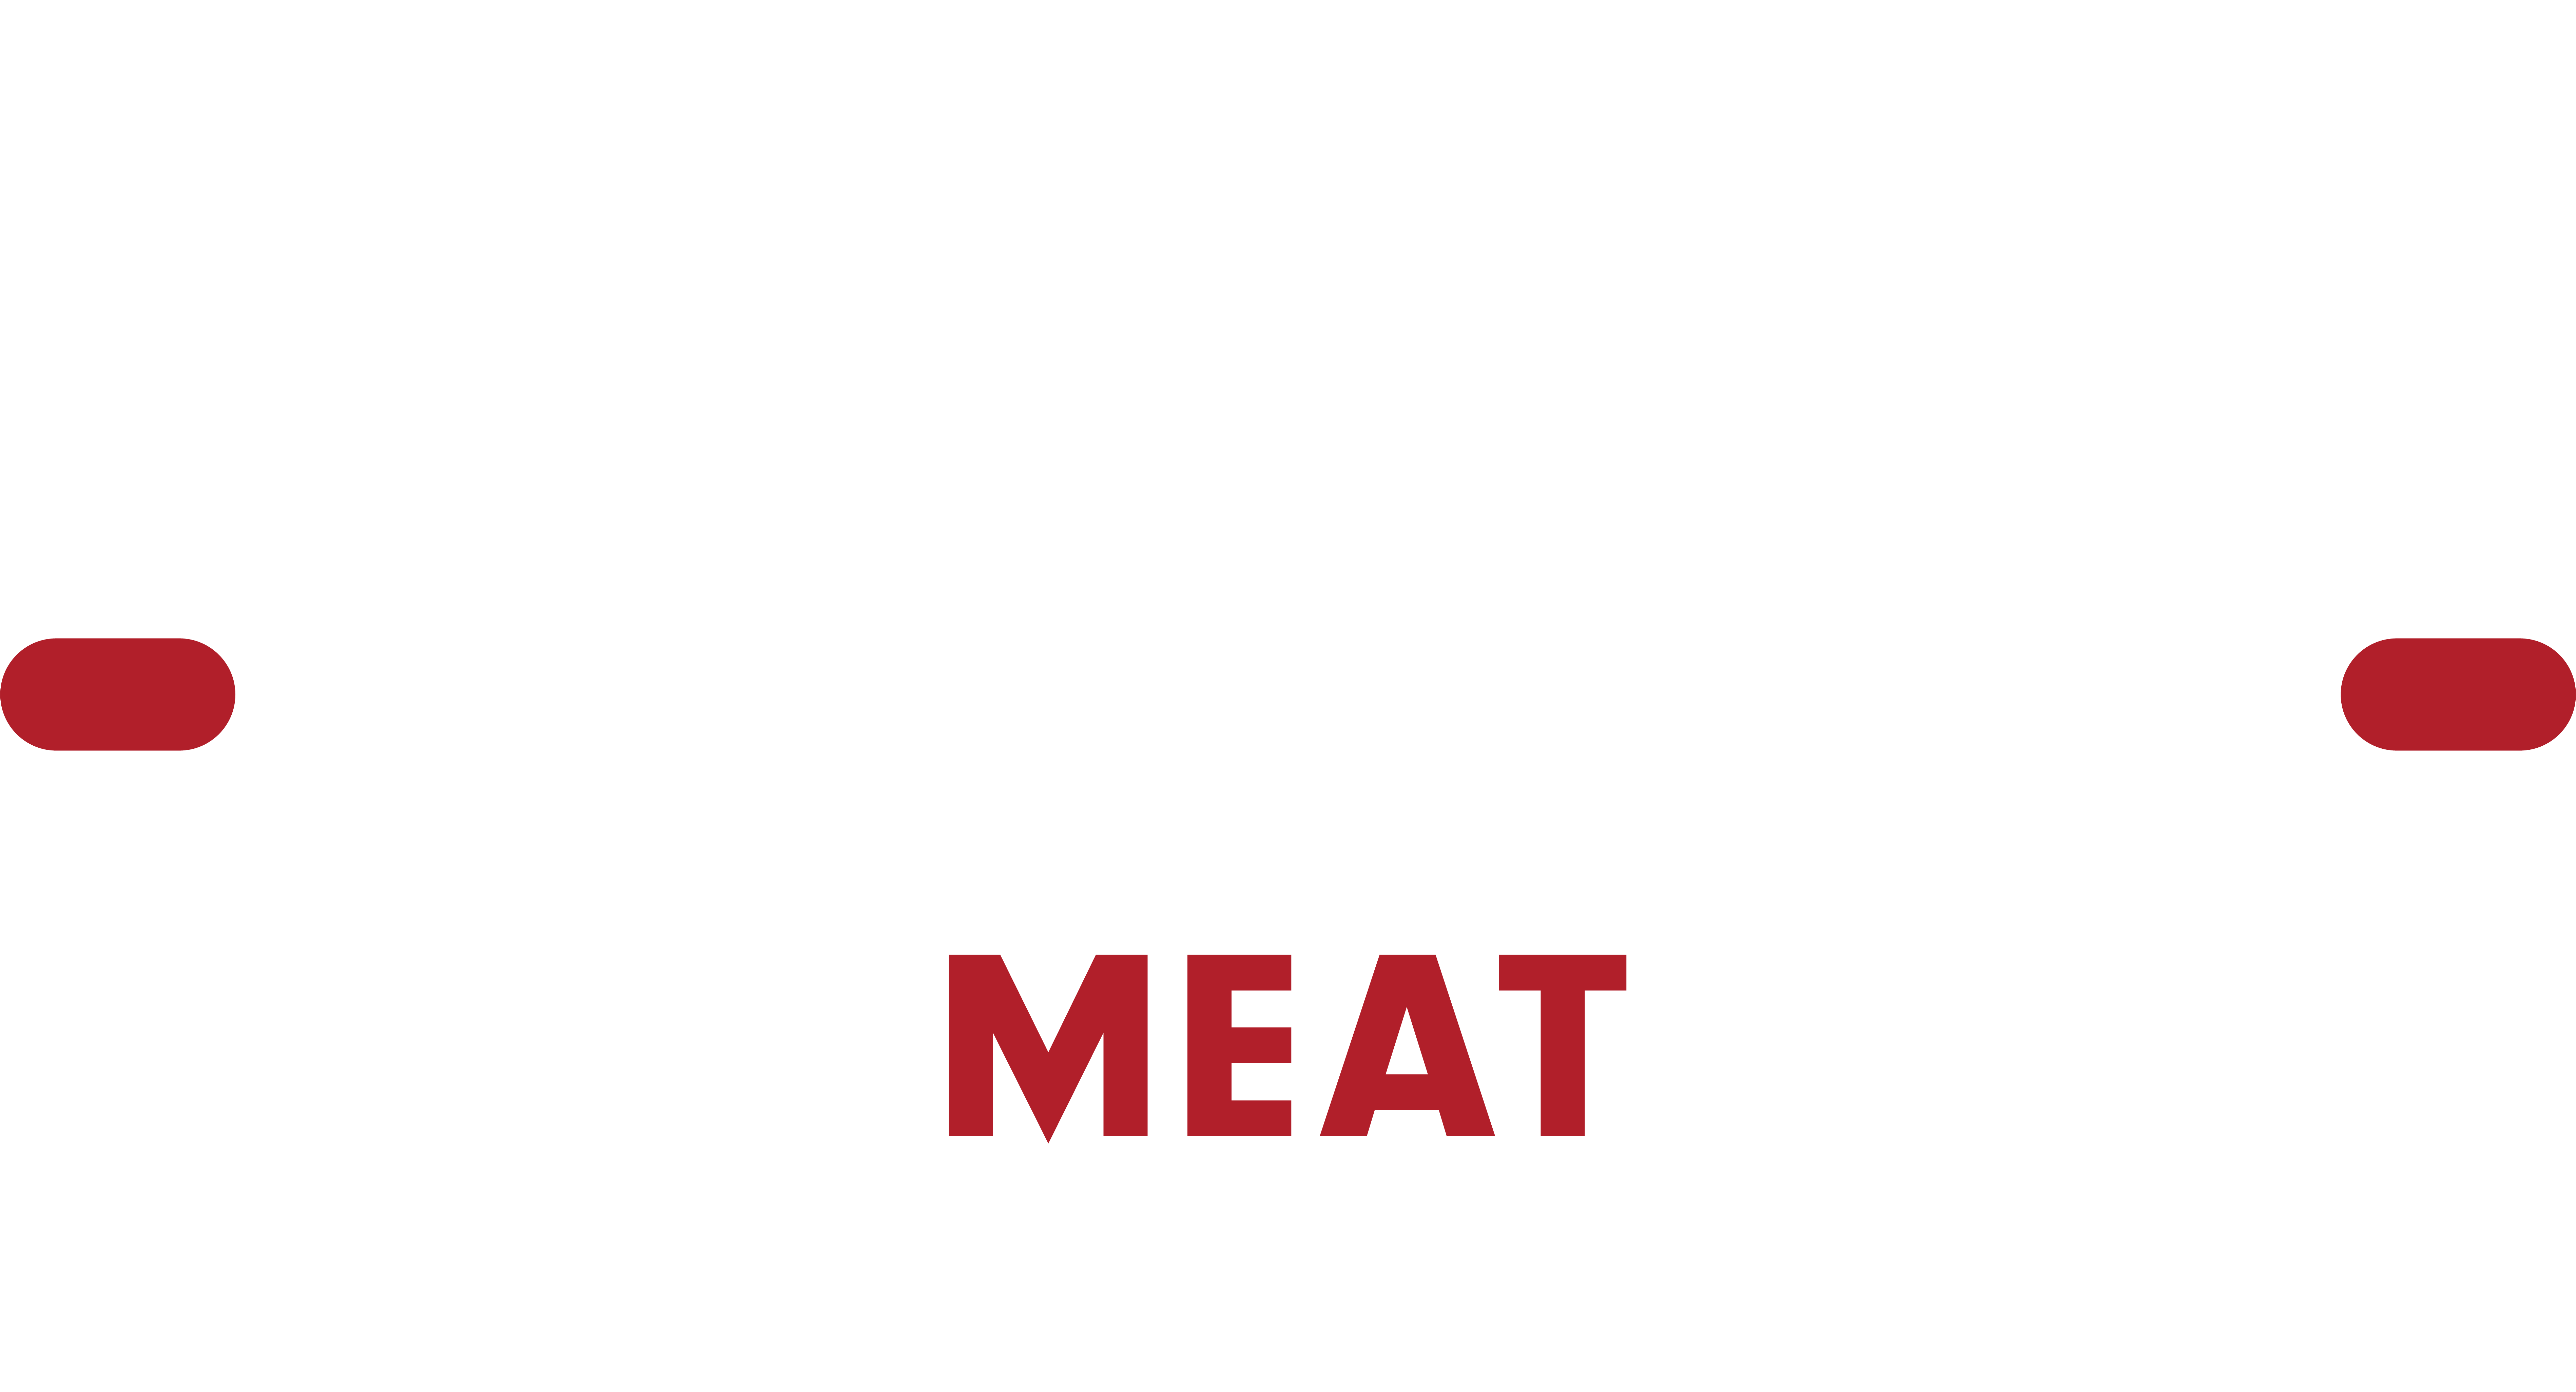 The Smoked Meat